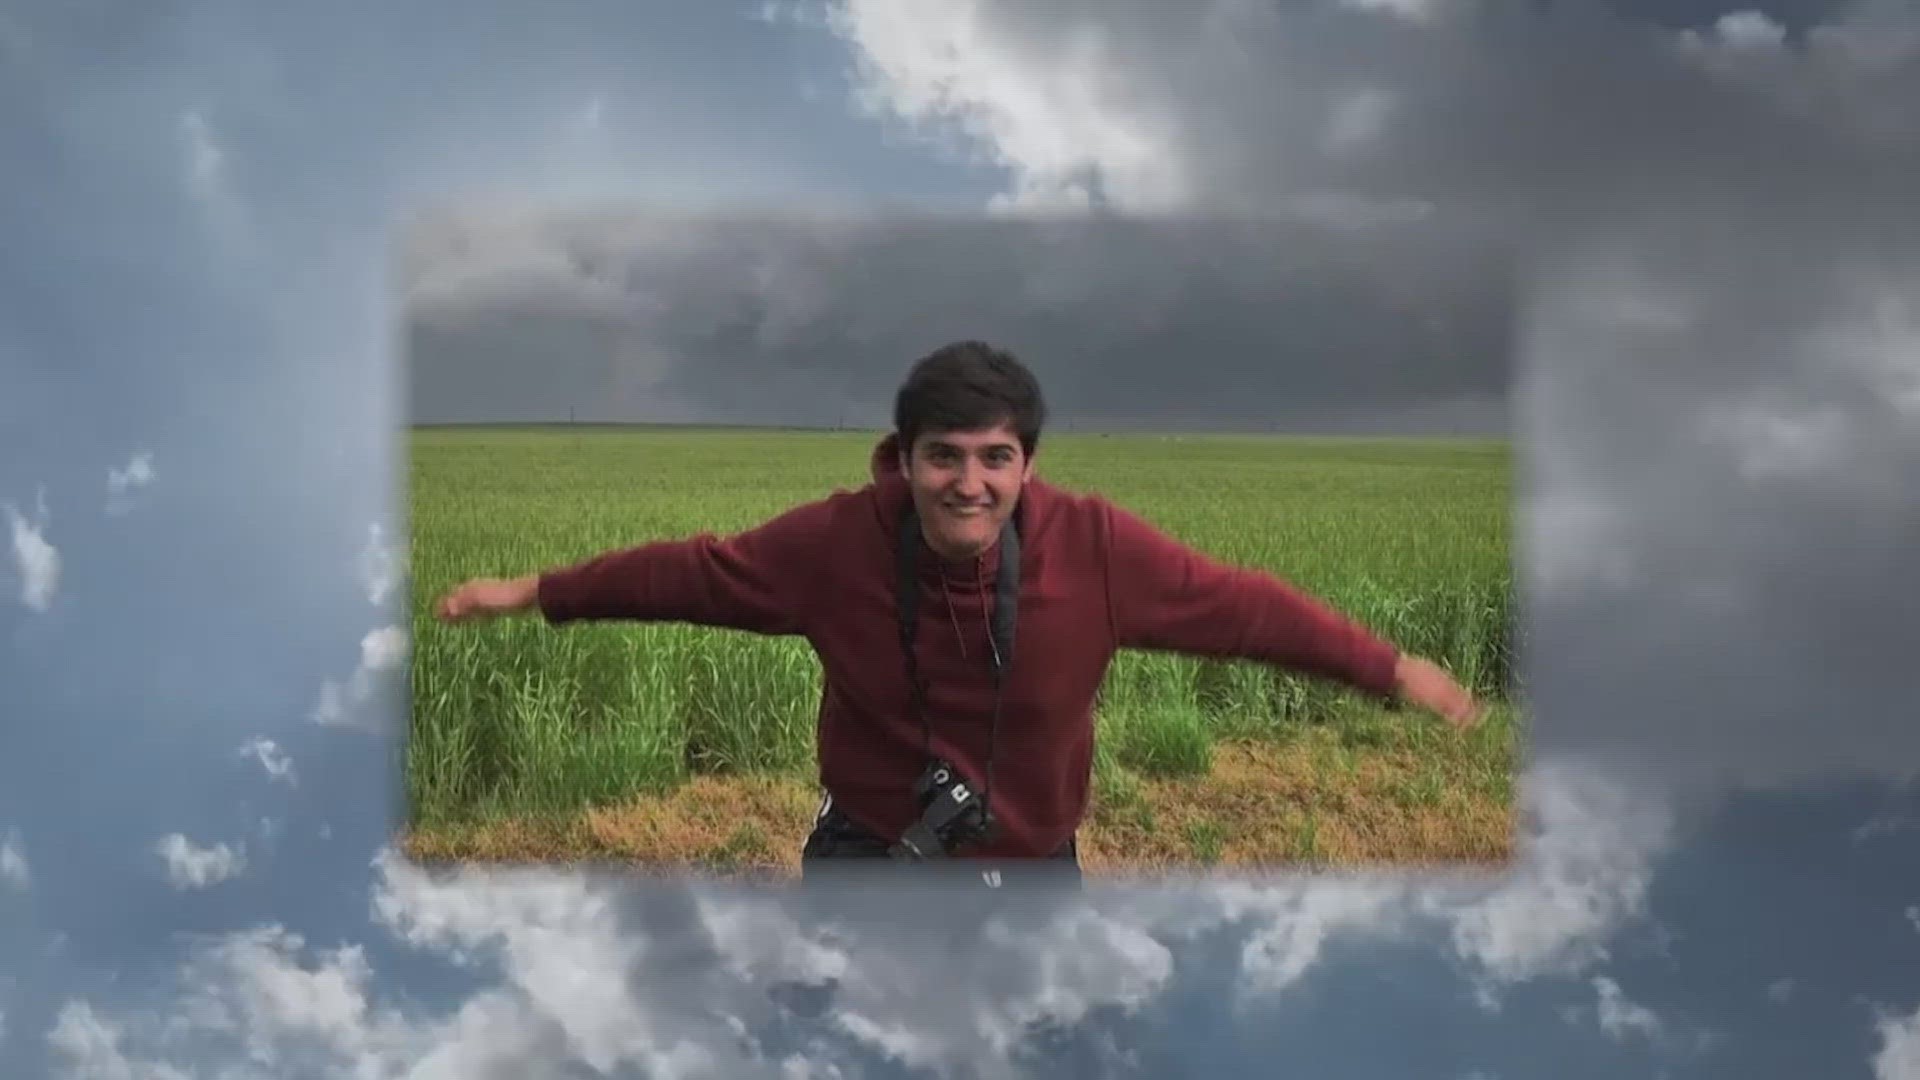 Nic Nair graduated from Hebron High School and had dreams of becoming a meteorologist when he and two other students died chasing storms last year.